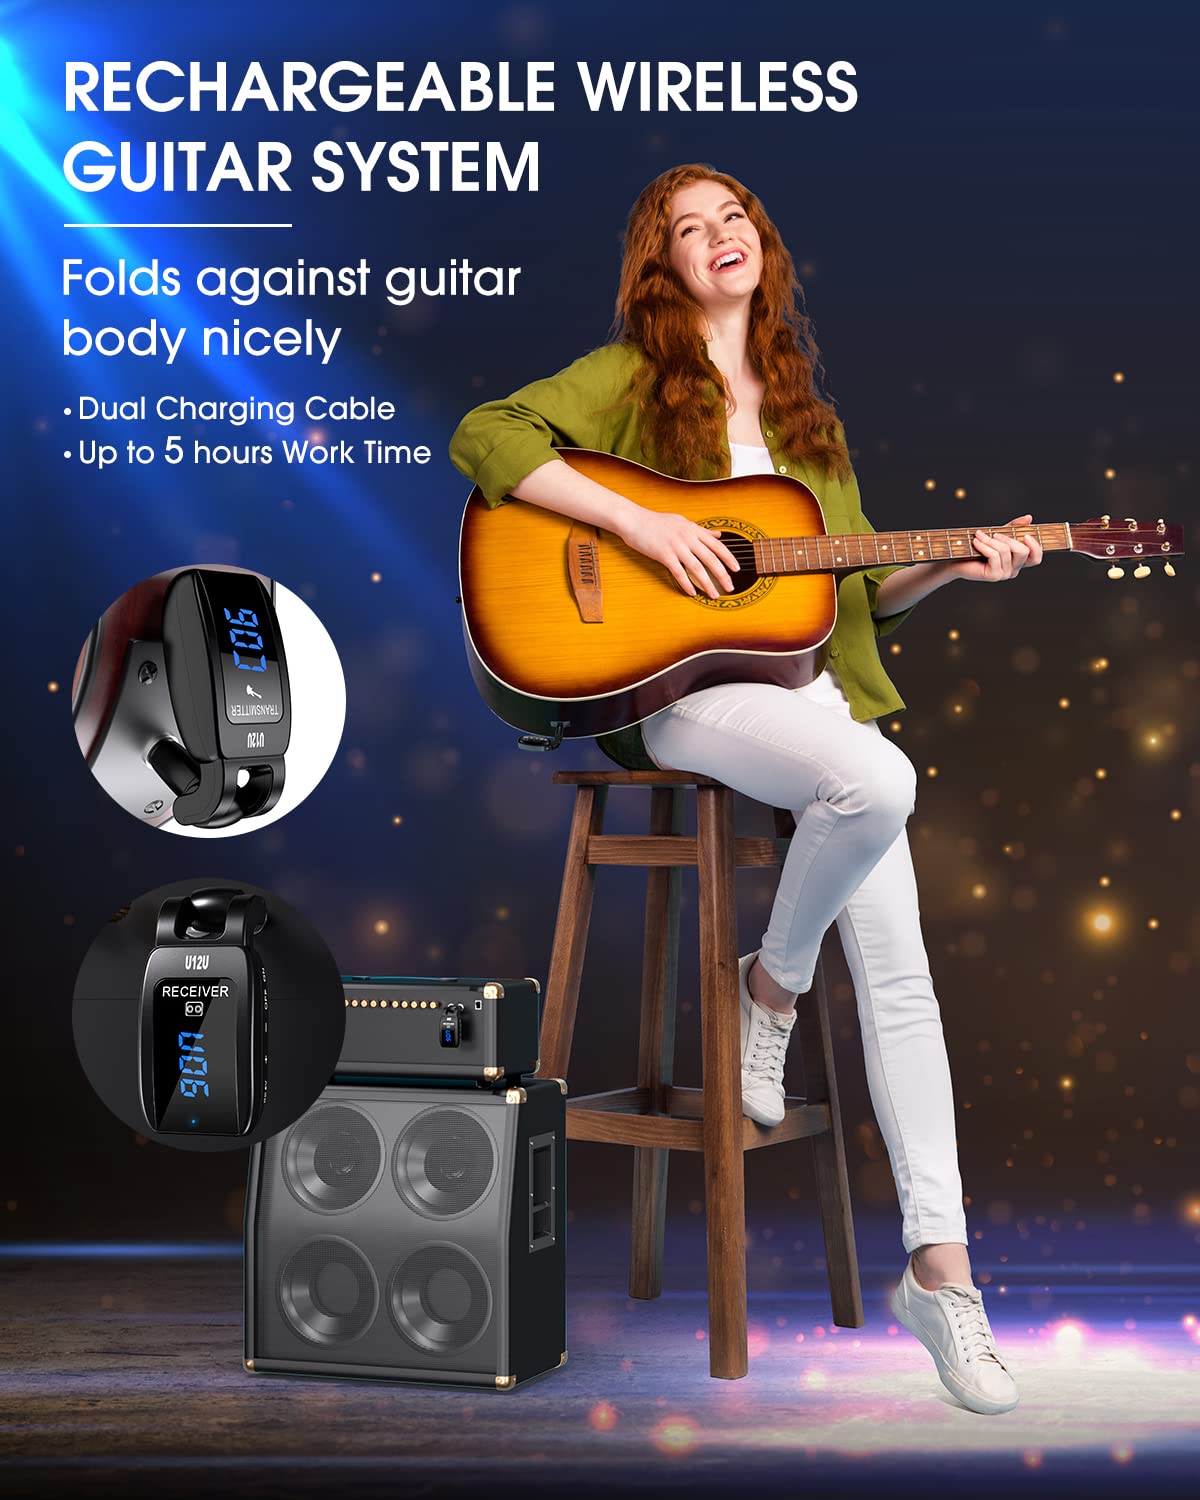 TTSTAR ISAIBELL Wireless Guitar System Instrument System Electric Guitar Transmitter Receiver Rechargeable Bass Accessories Digital Display Stereo Jack Audio Cable Adapter 15Set Frequency